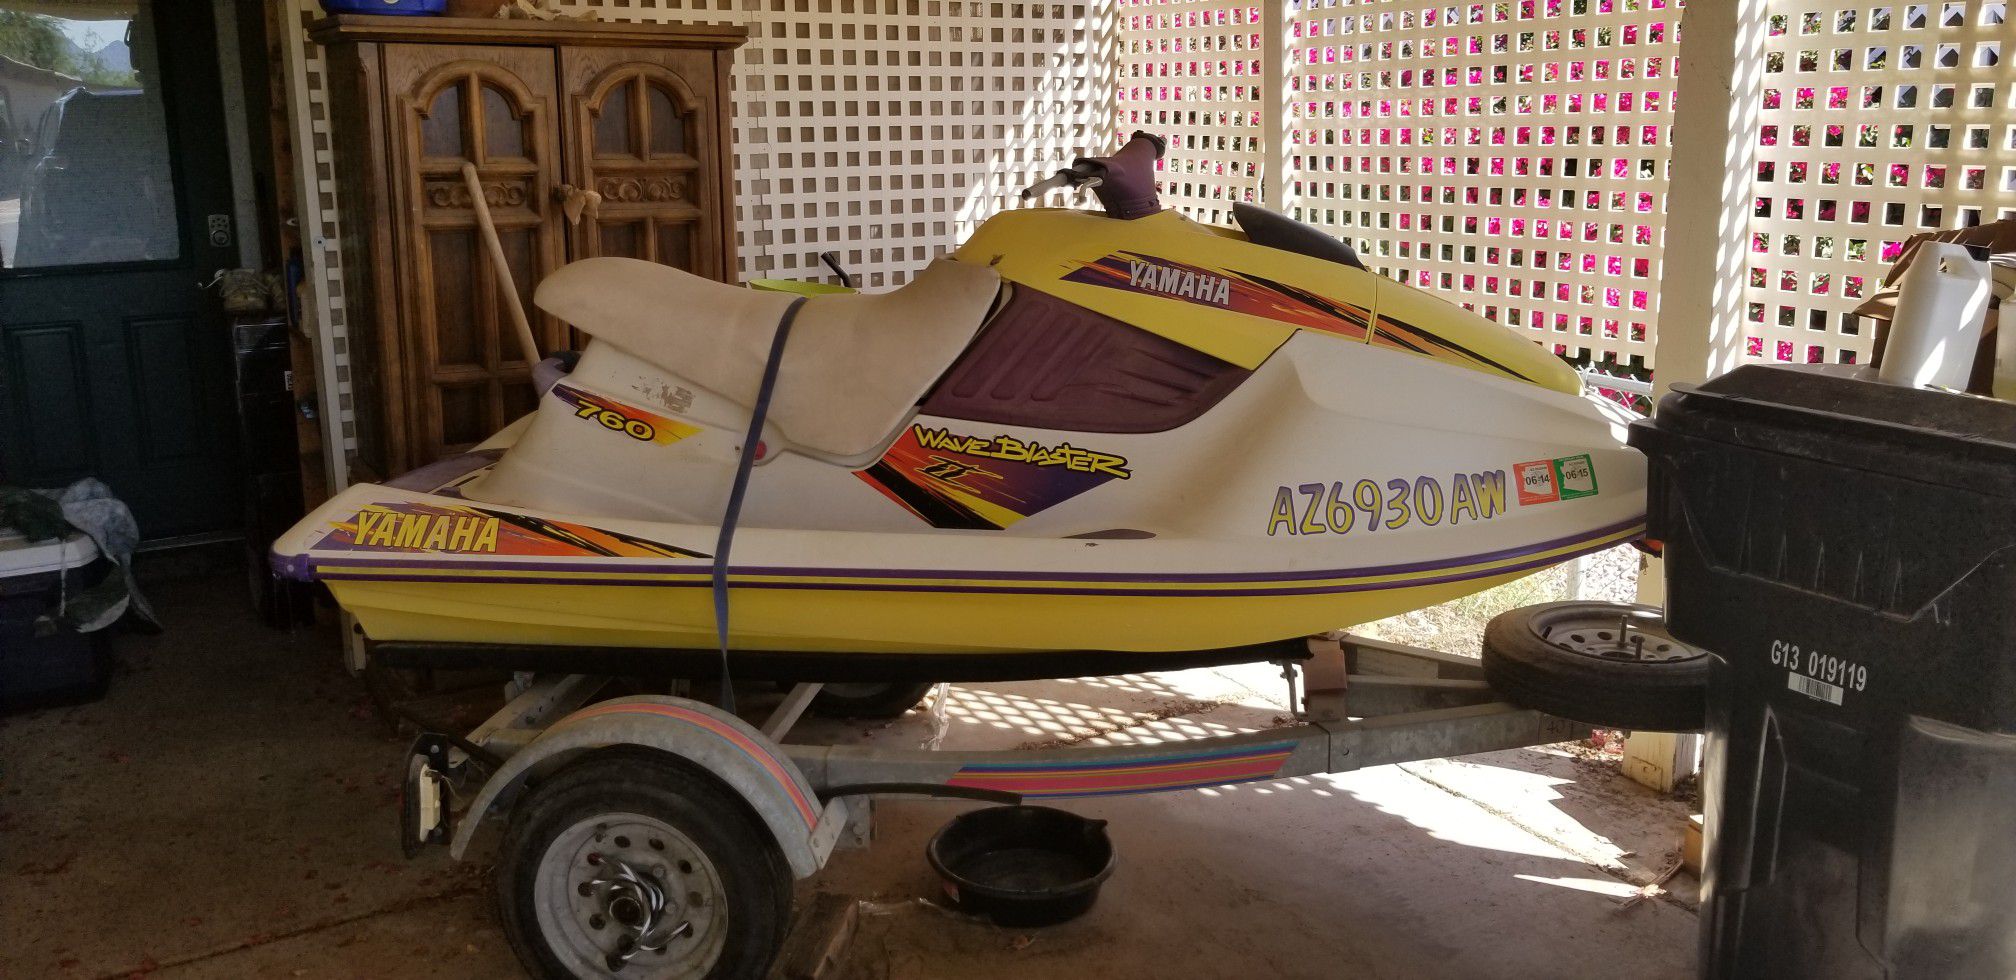 Yamaha 760 Jetski and trailer with clear title and plates